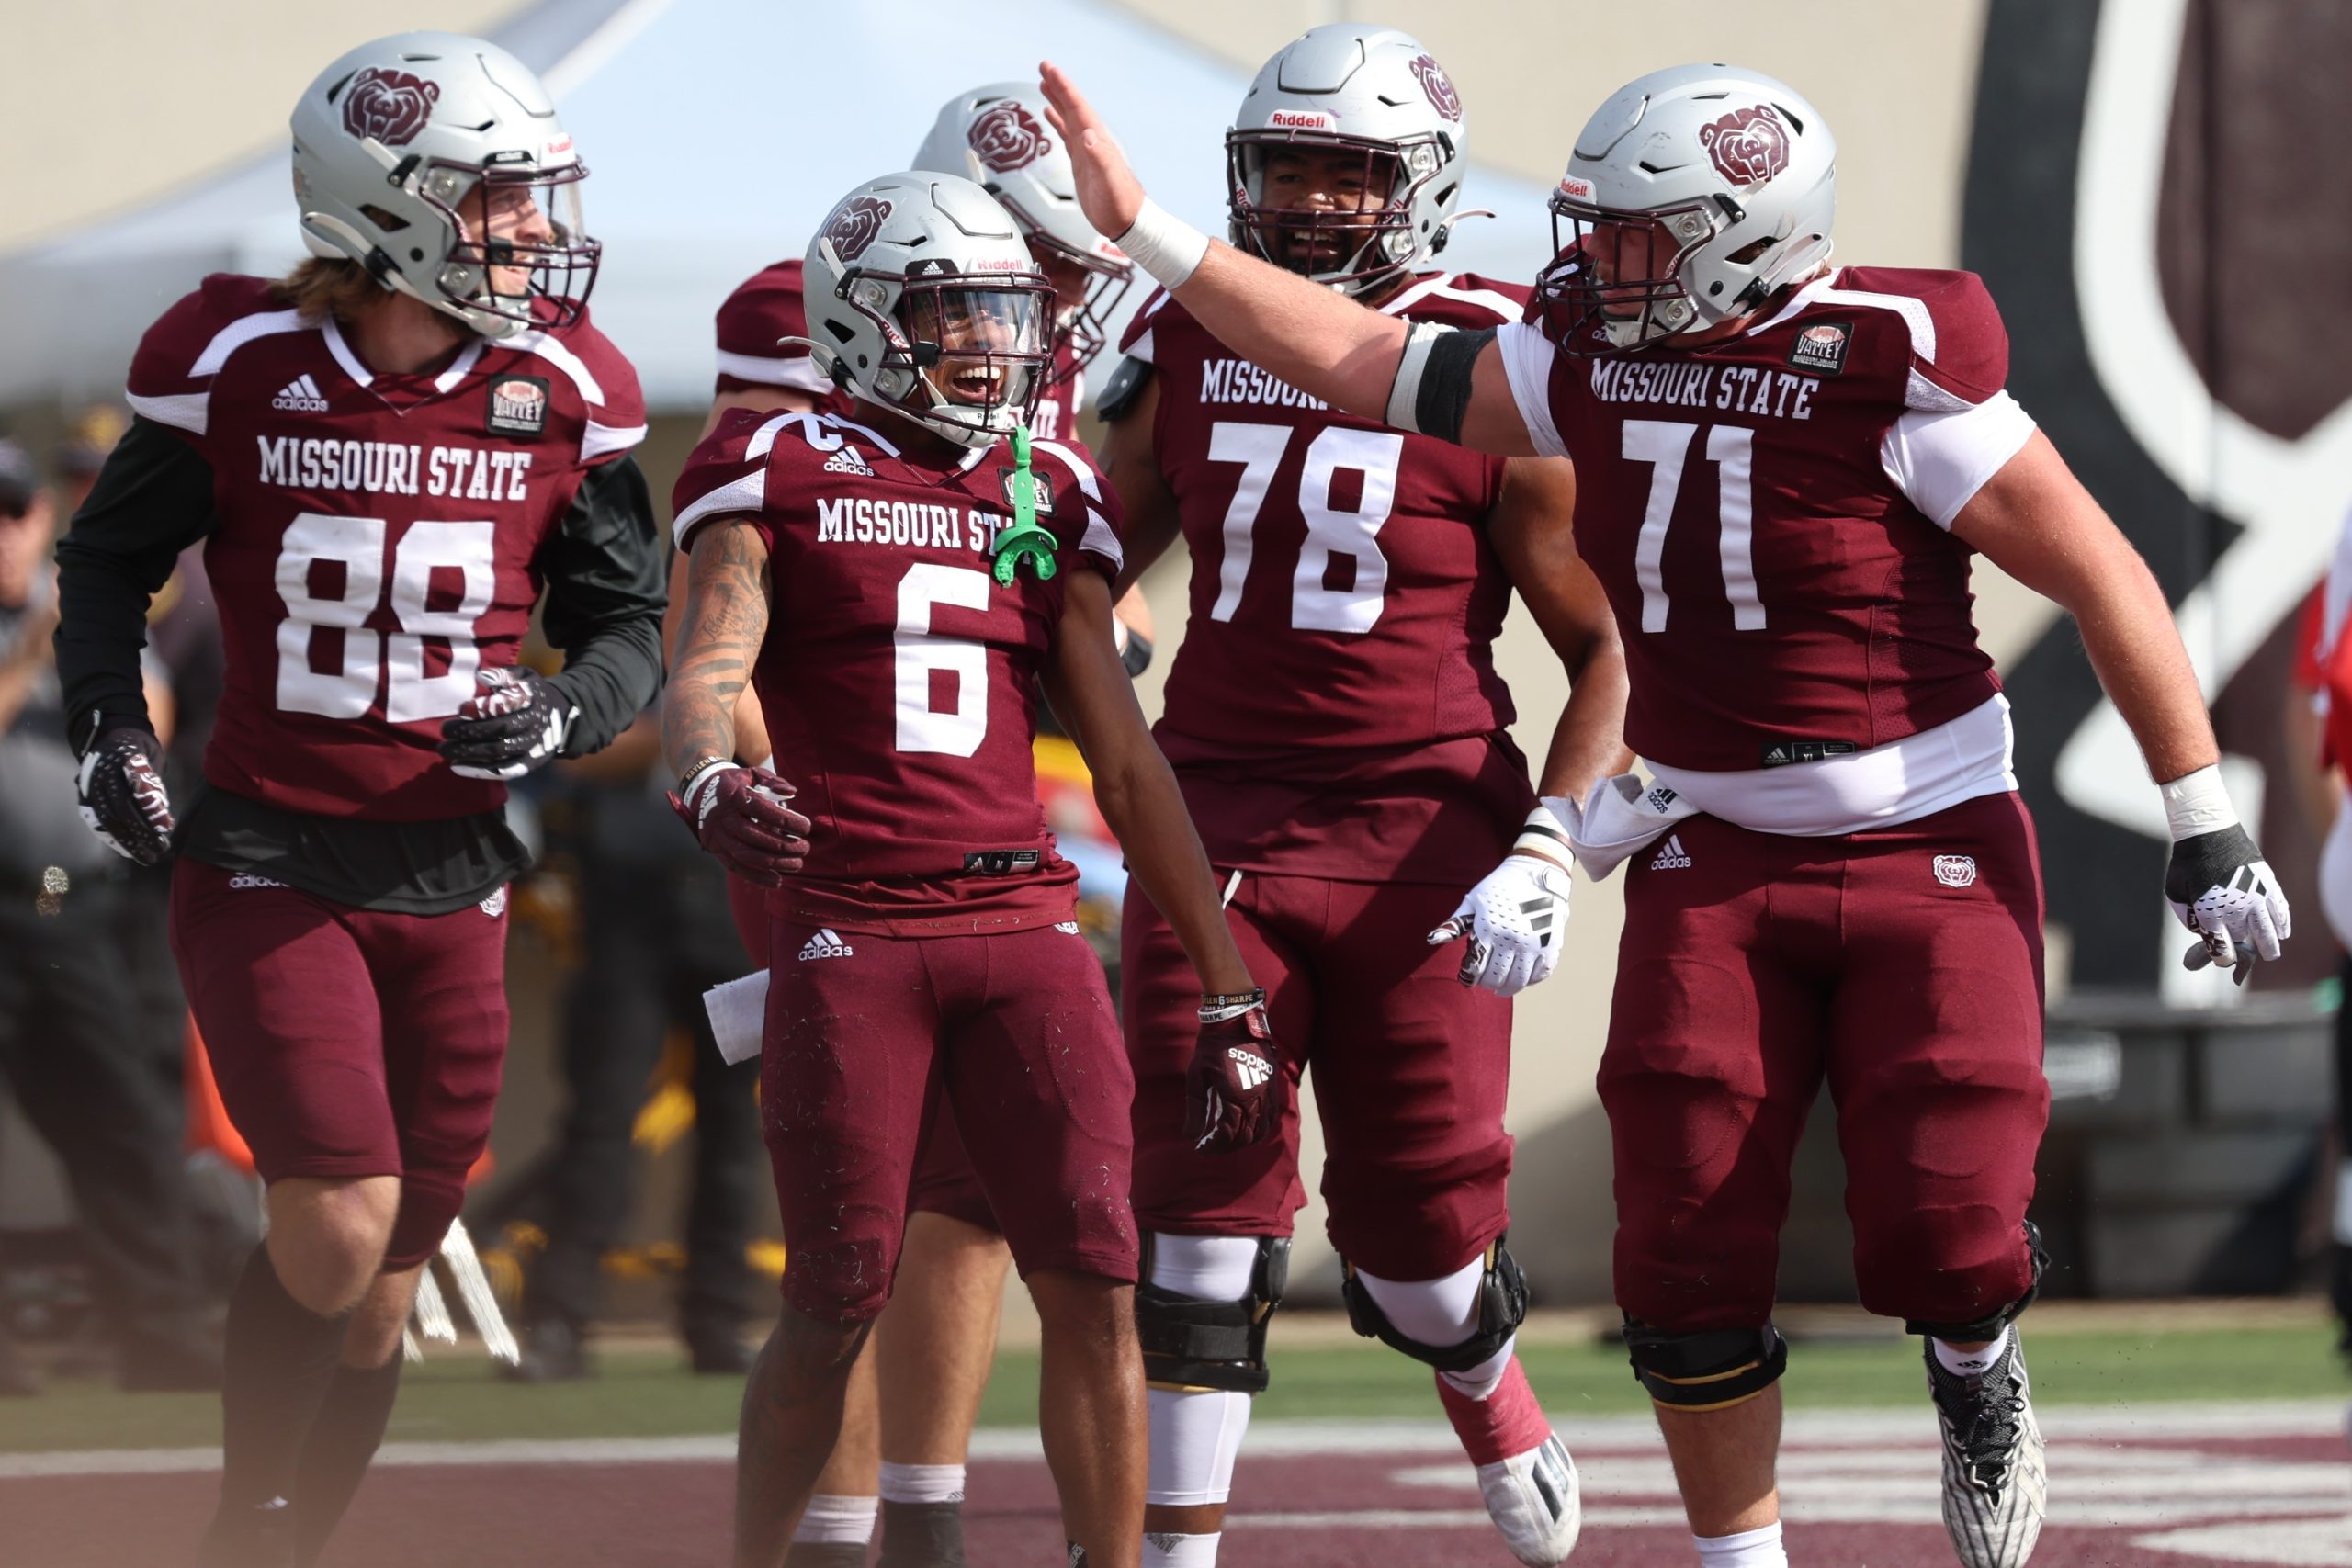 A group of Missouri State football players celebrate a touchdown by Raylen Sharpe